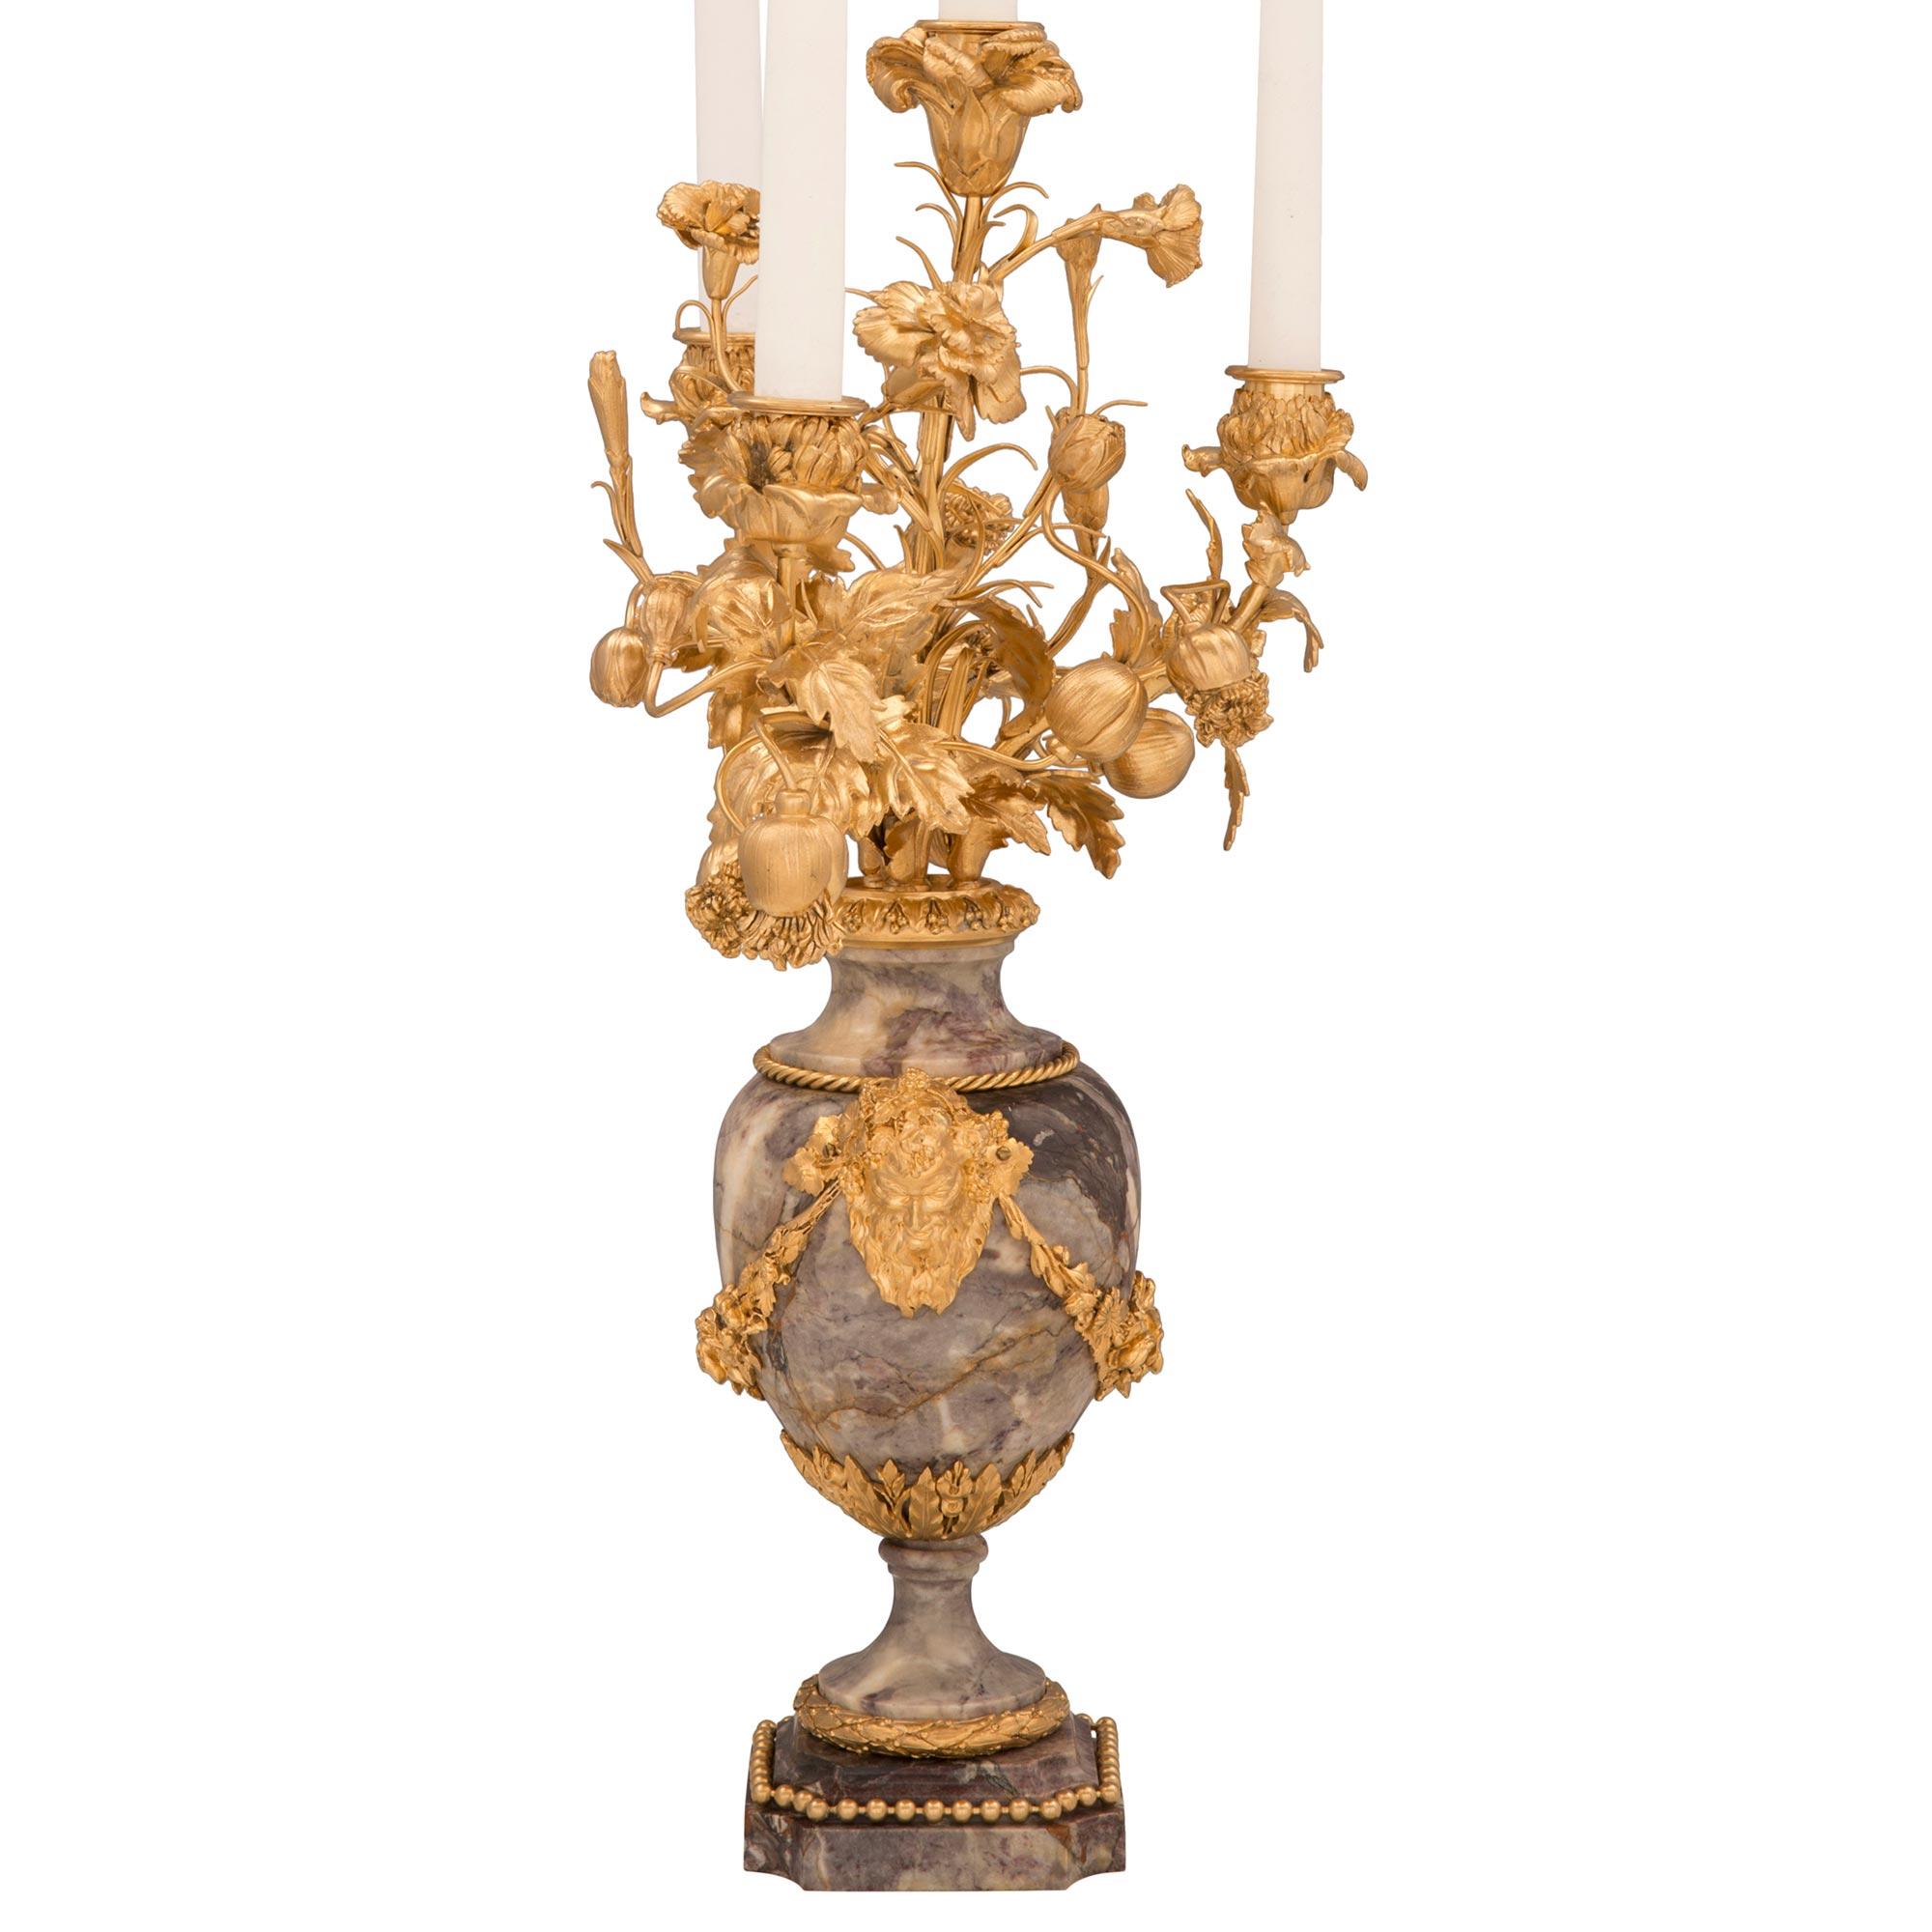 Pair of French 19th Century Louis XVI St. Belle Époque Period Candelabras In Good Condition For Sale In West Palm Beach, FL